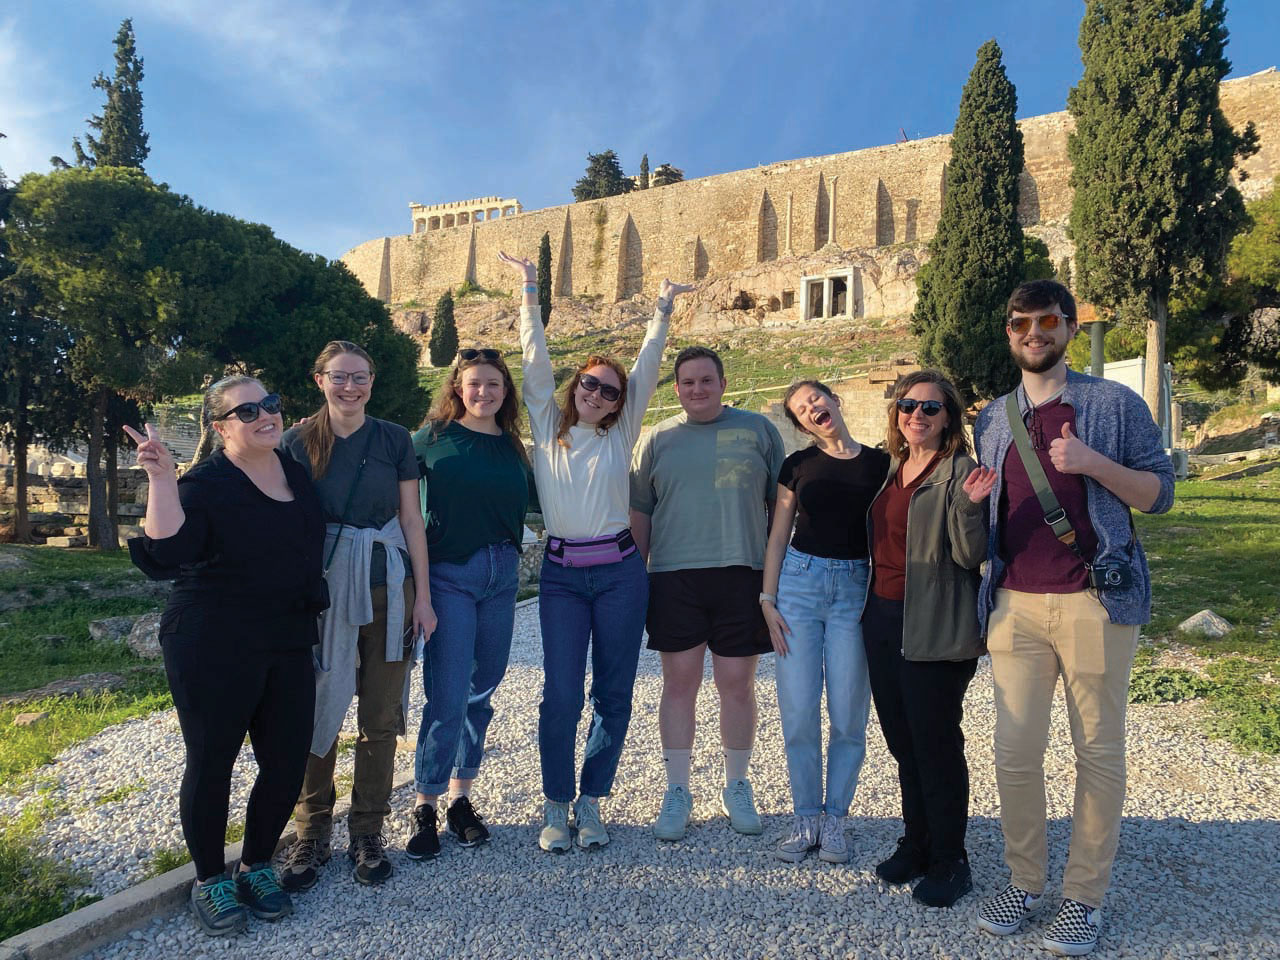 OSU students and faculty along with State Department representatives, tour the Acropolis in Athens, Greece. From left: Dr. Laura Arata, Jessi Simmons, Izzy Elliott, Victoria Hughes, Jerret Carpenter, Sydney Galante, Sarah Ra and Andrew Fackler.